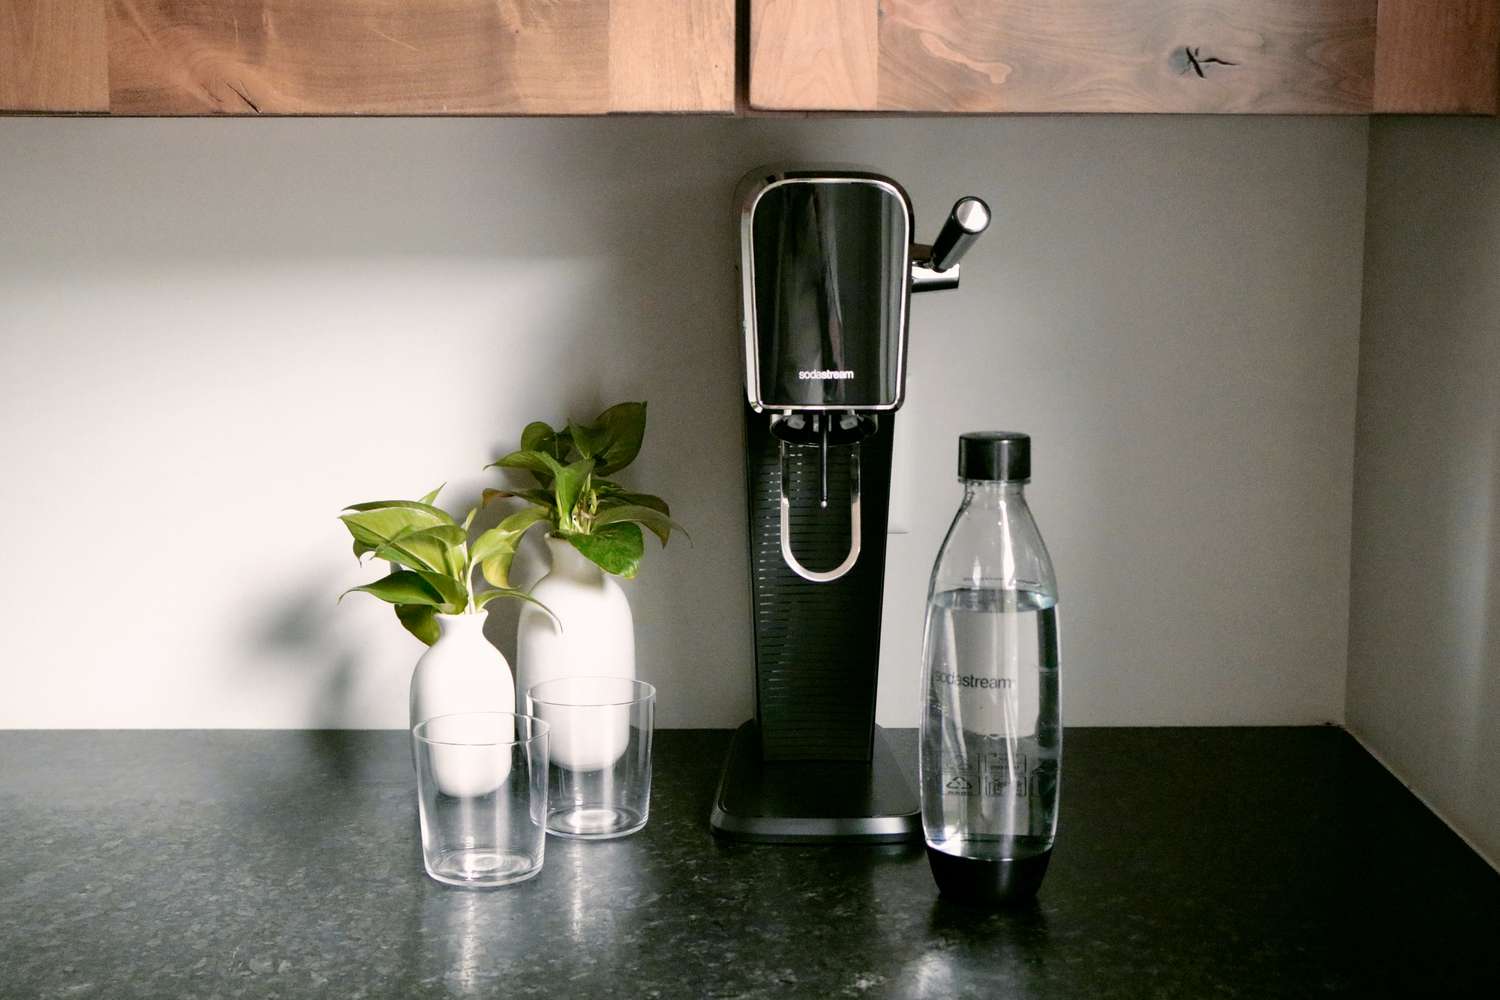 A black SodaStream on a kitchen countertop with two glasses and a SodaStream bottle beside it